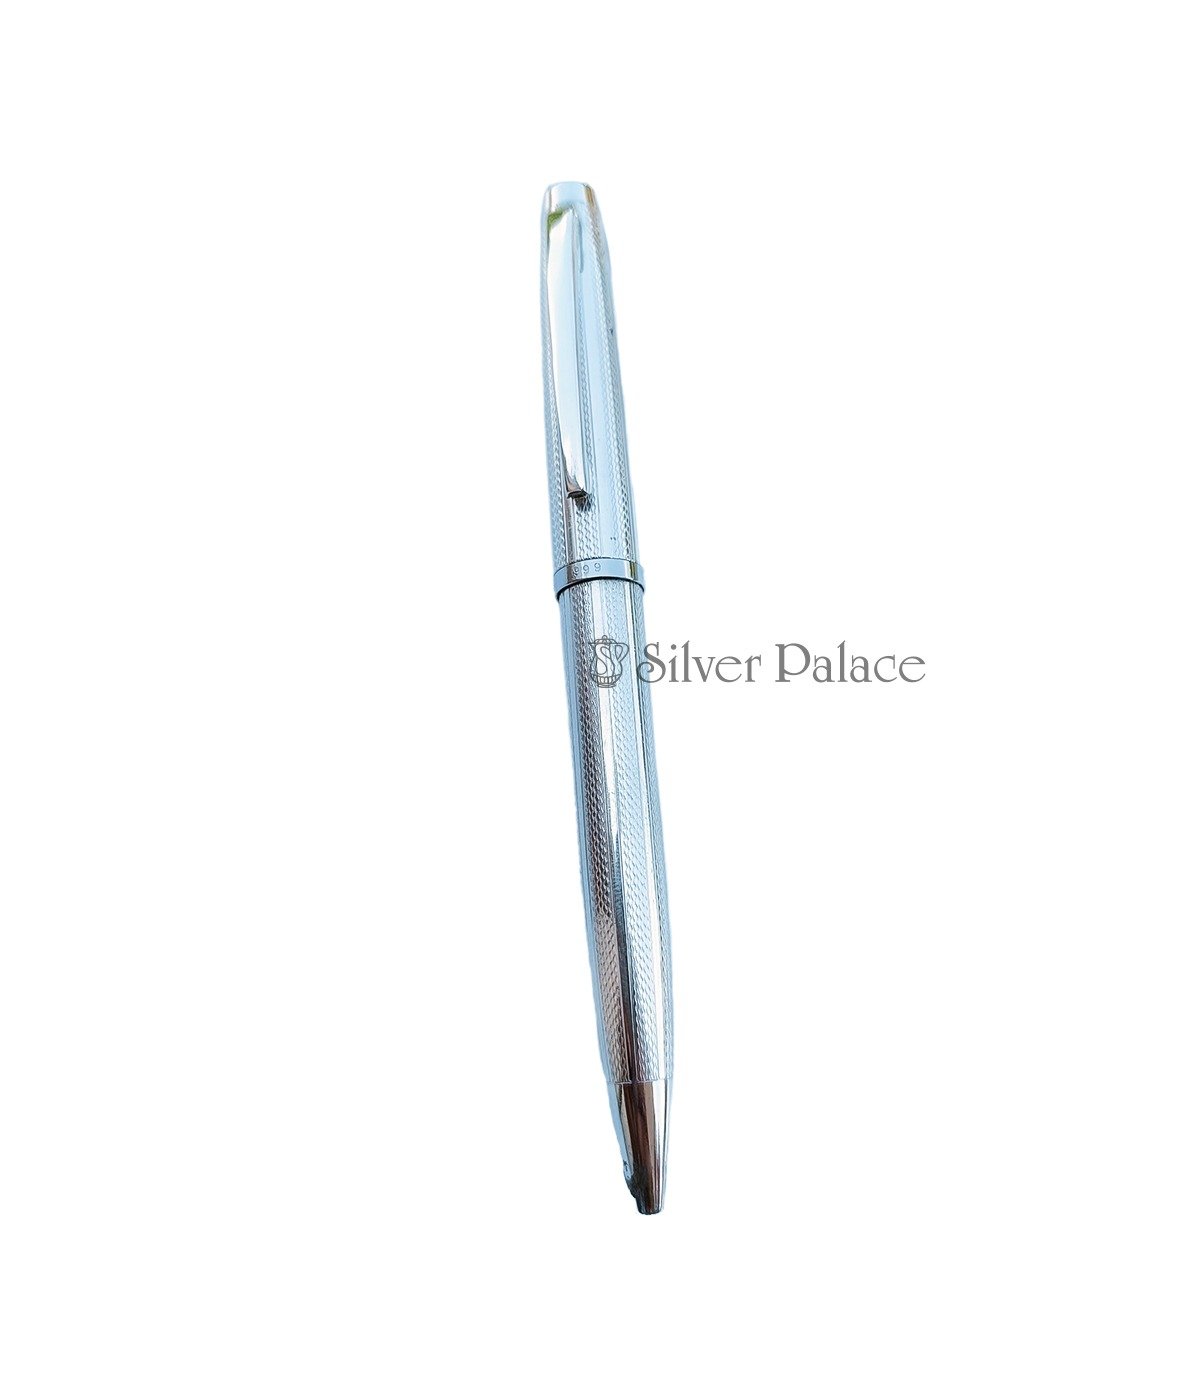 999 PURE SILVER FOUNTAIN PEN WRITING INSTRUMENT